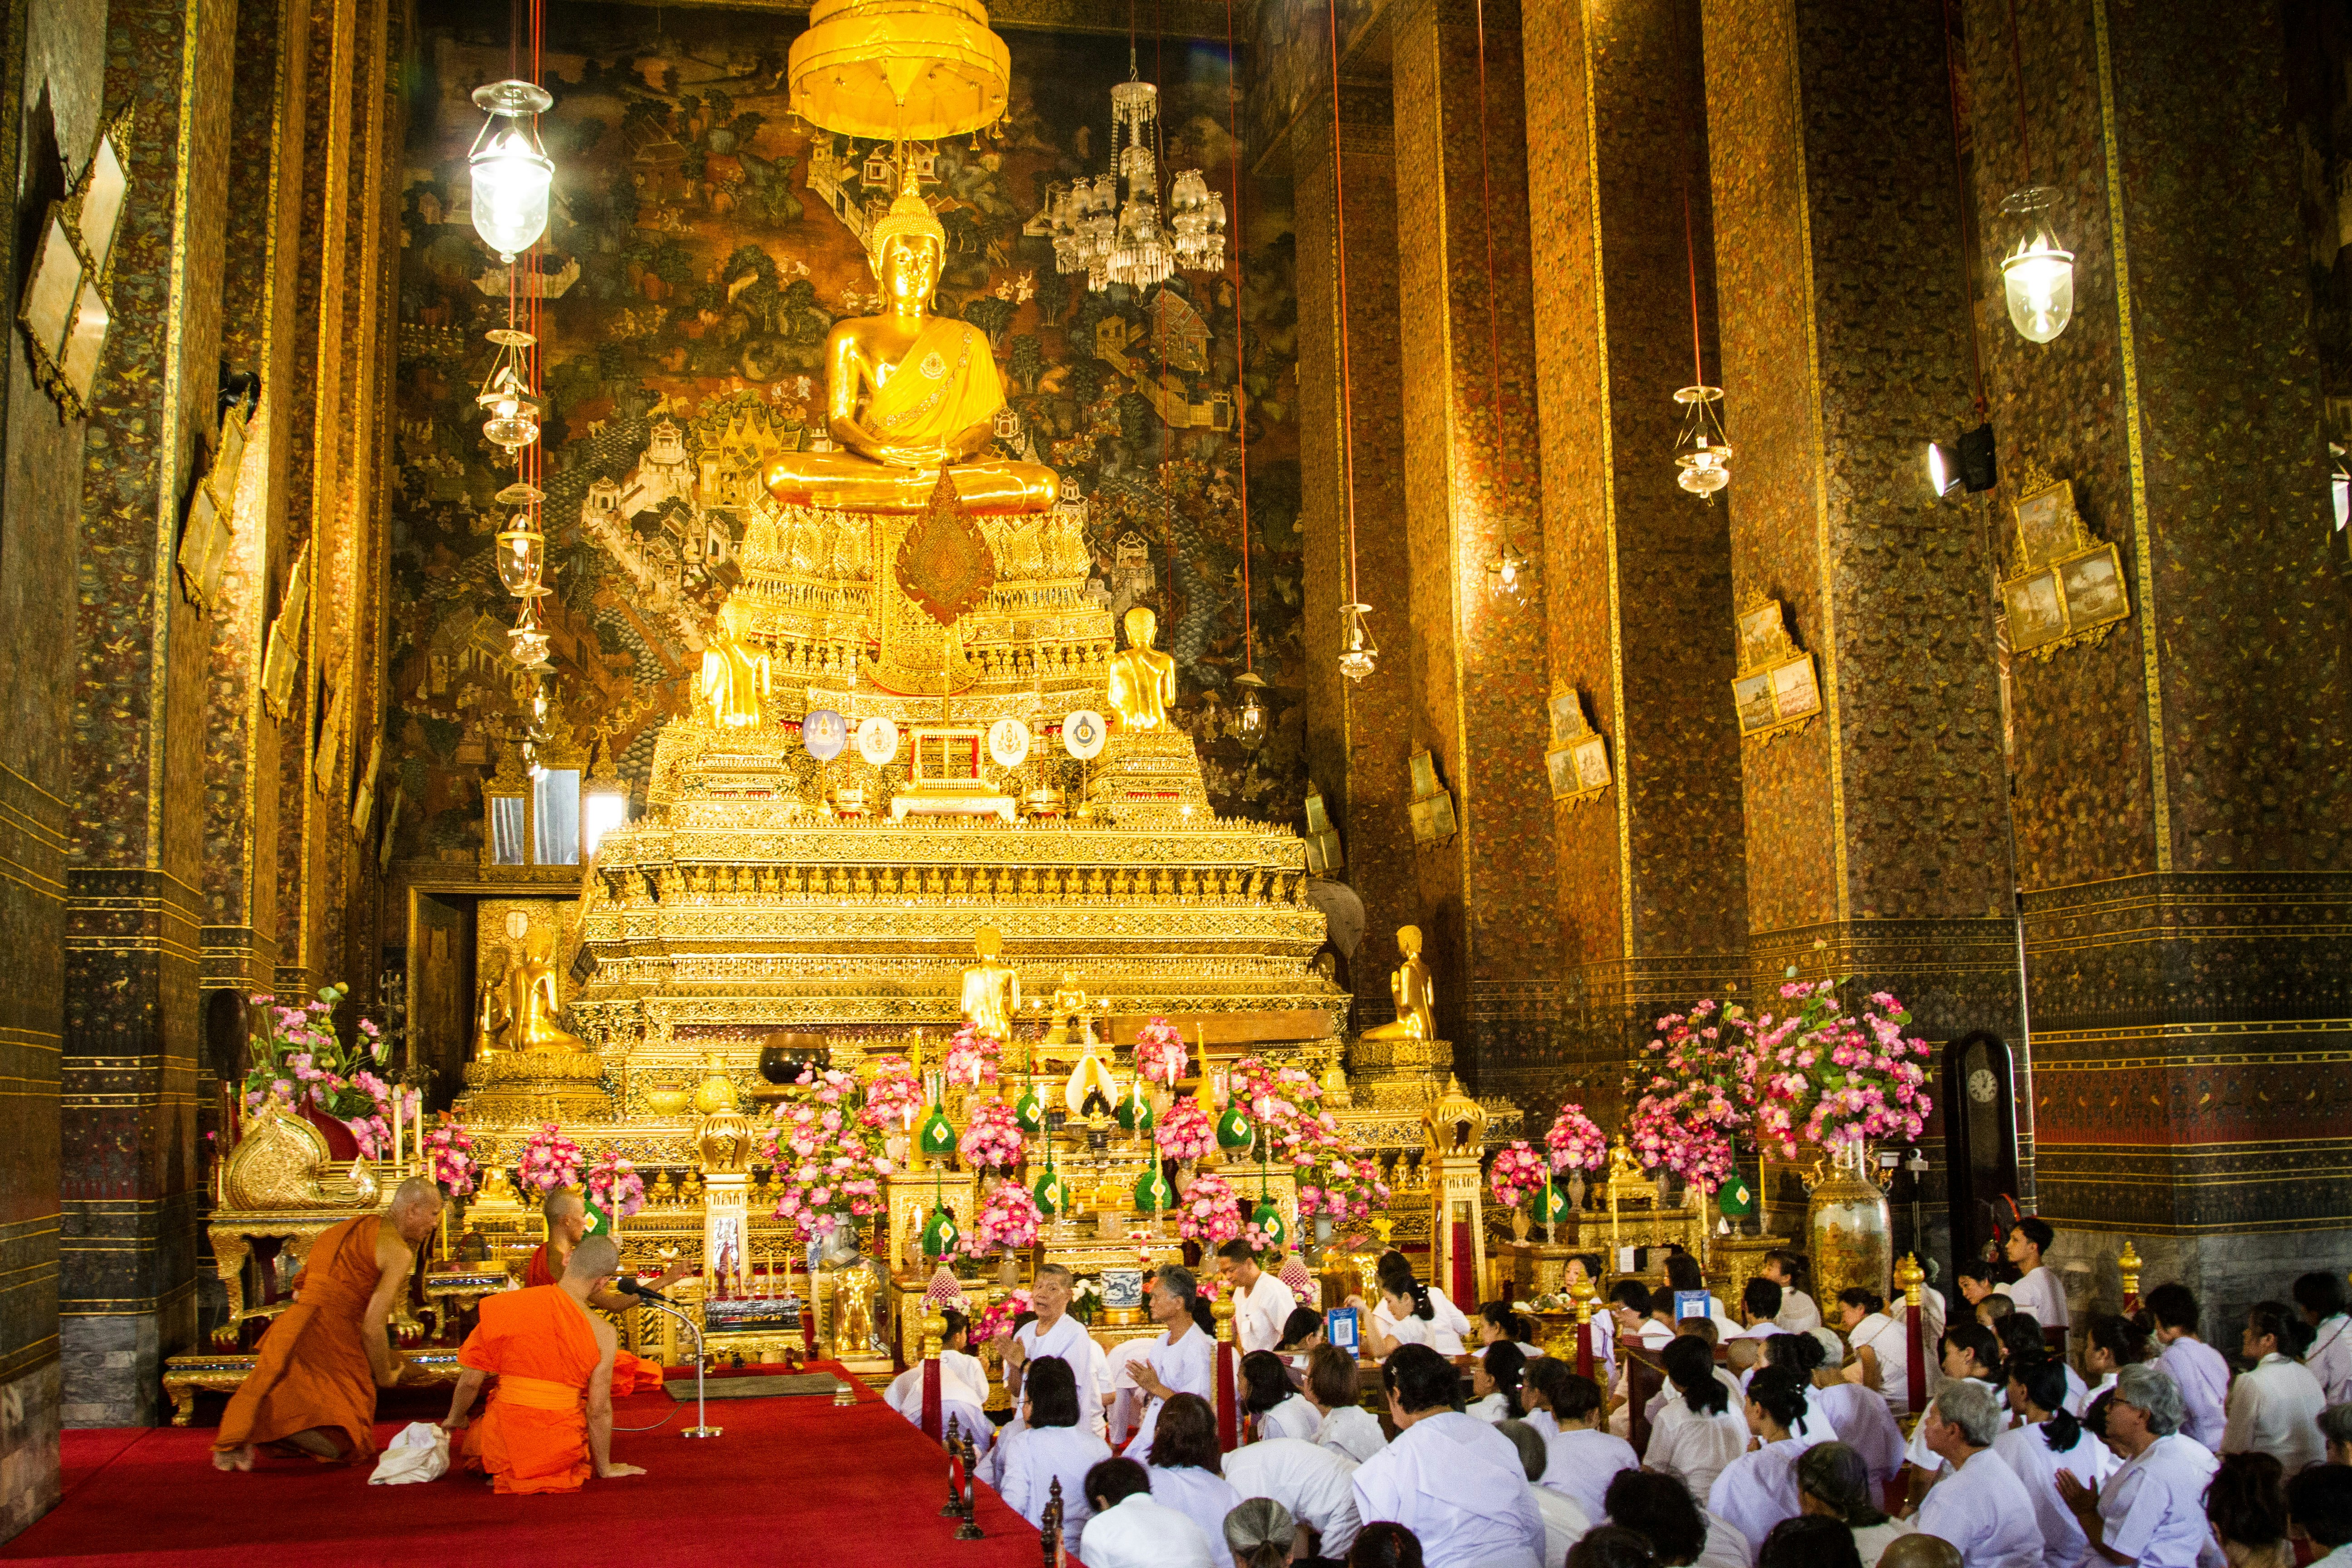 people in white shirt standing near gold temple during daytime